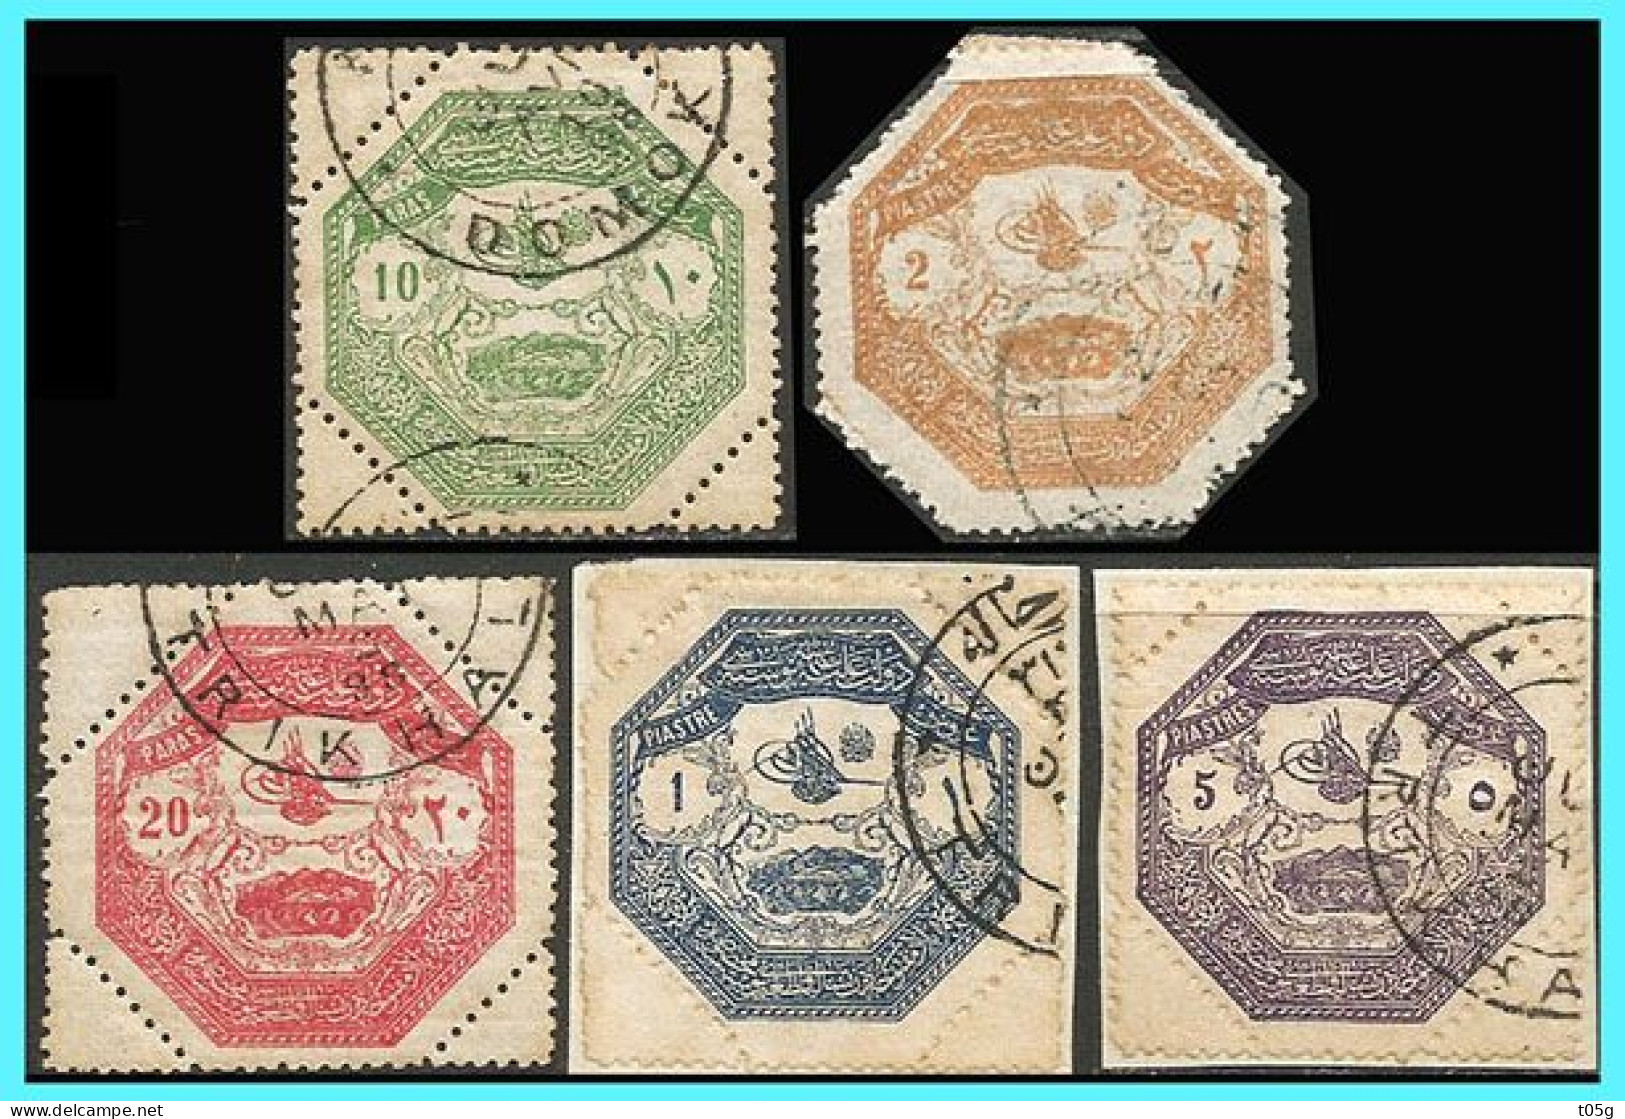 GREECE-GRECE-THESSALY- 1898:  Thessaly Compl. Set Used - Thessalien